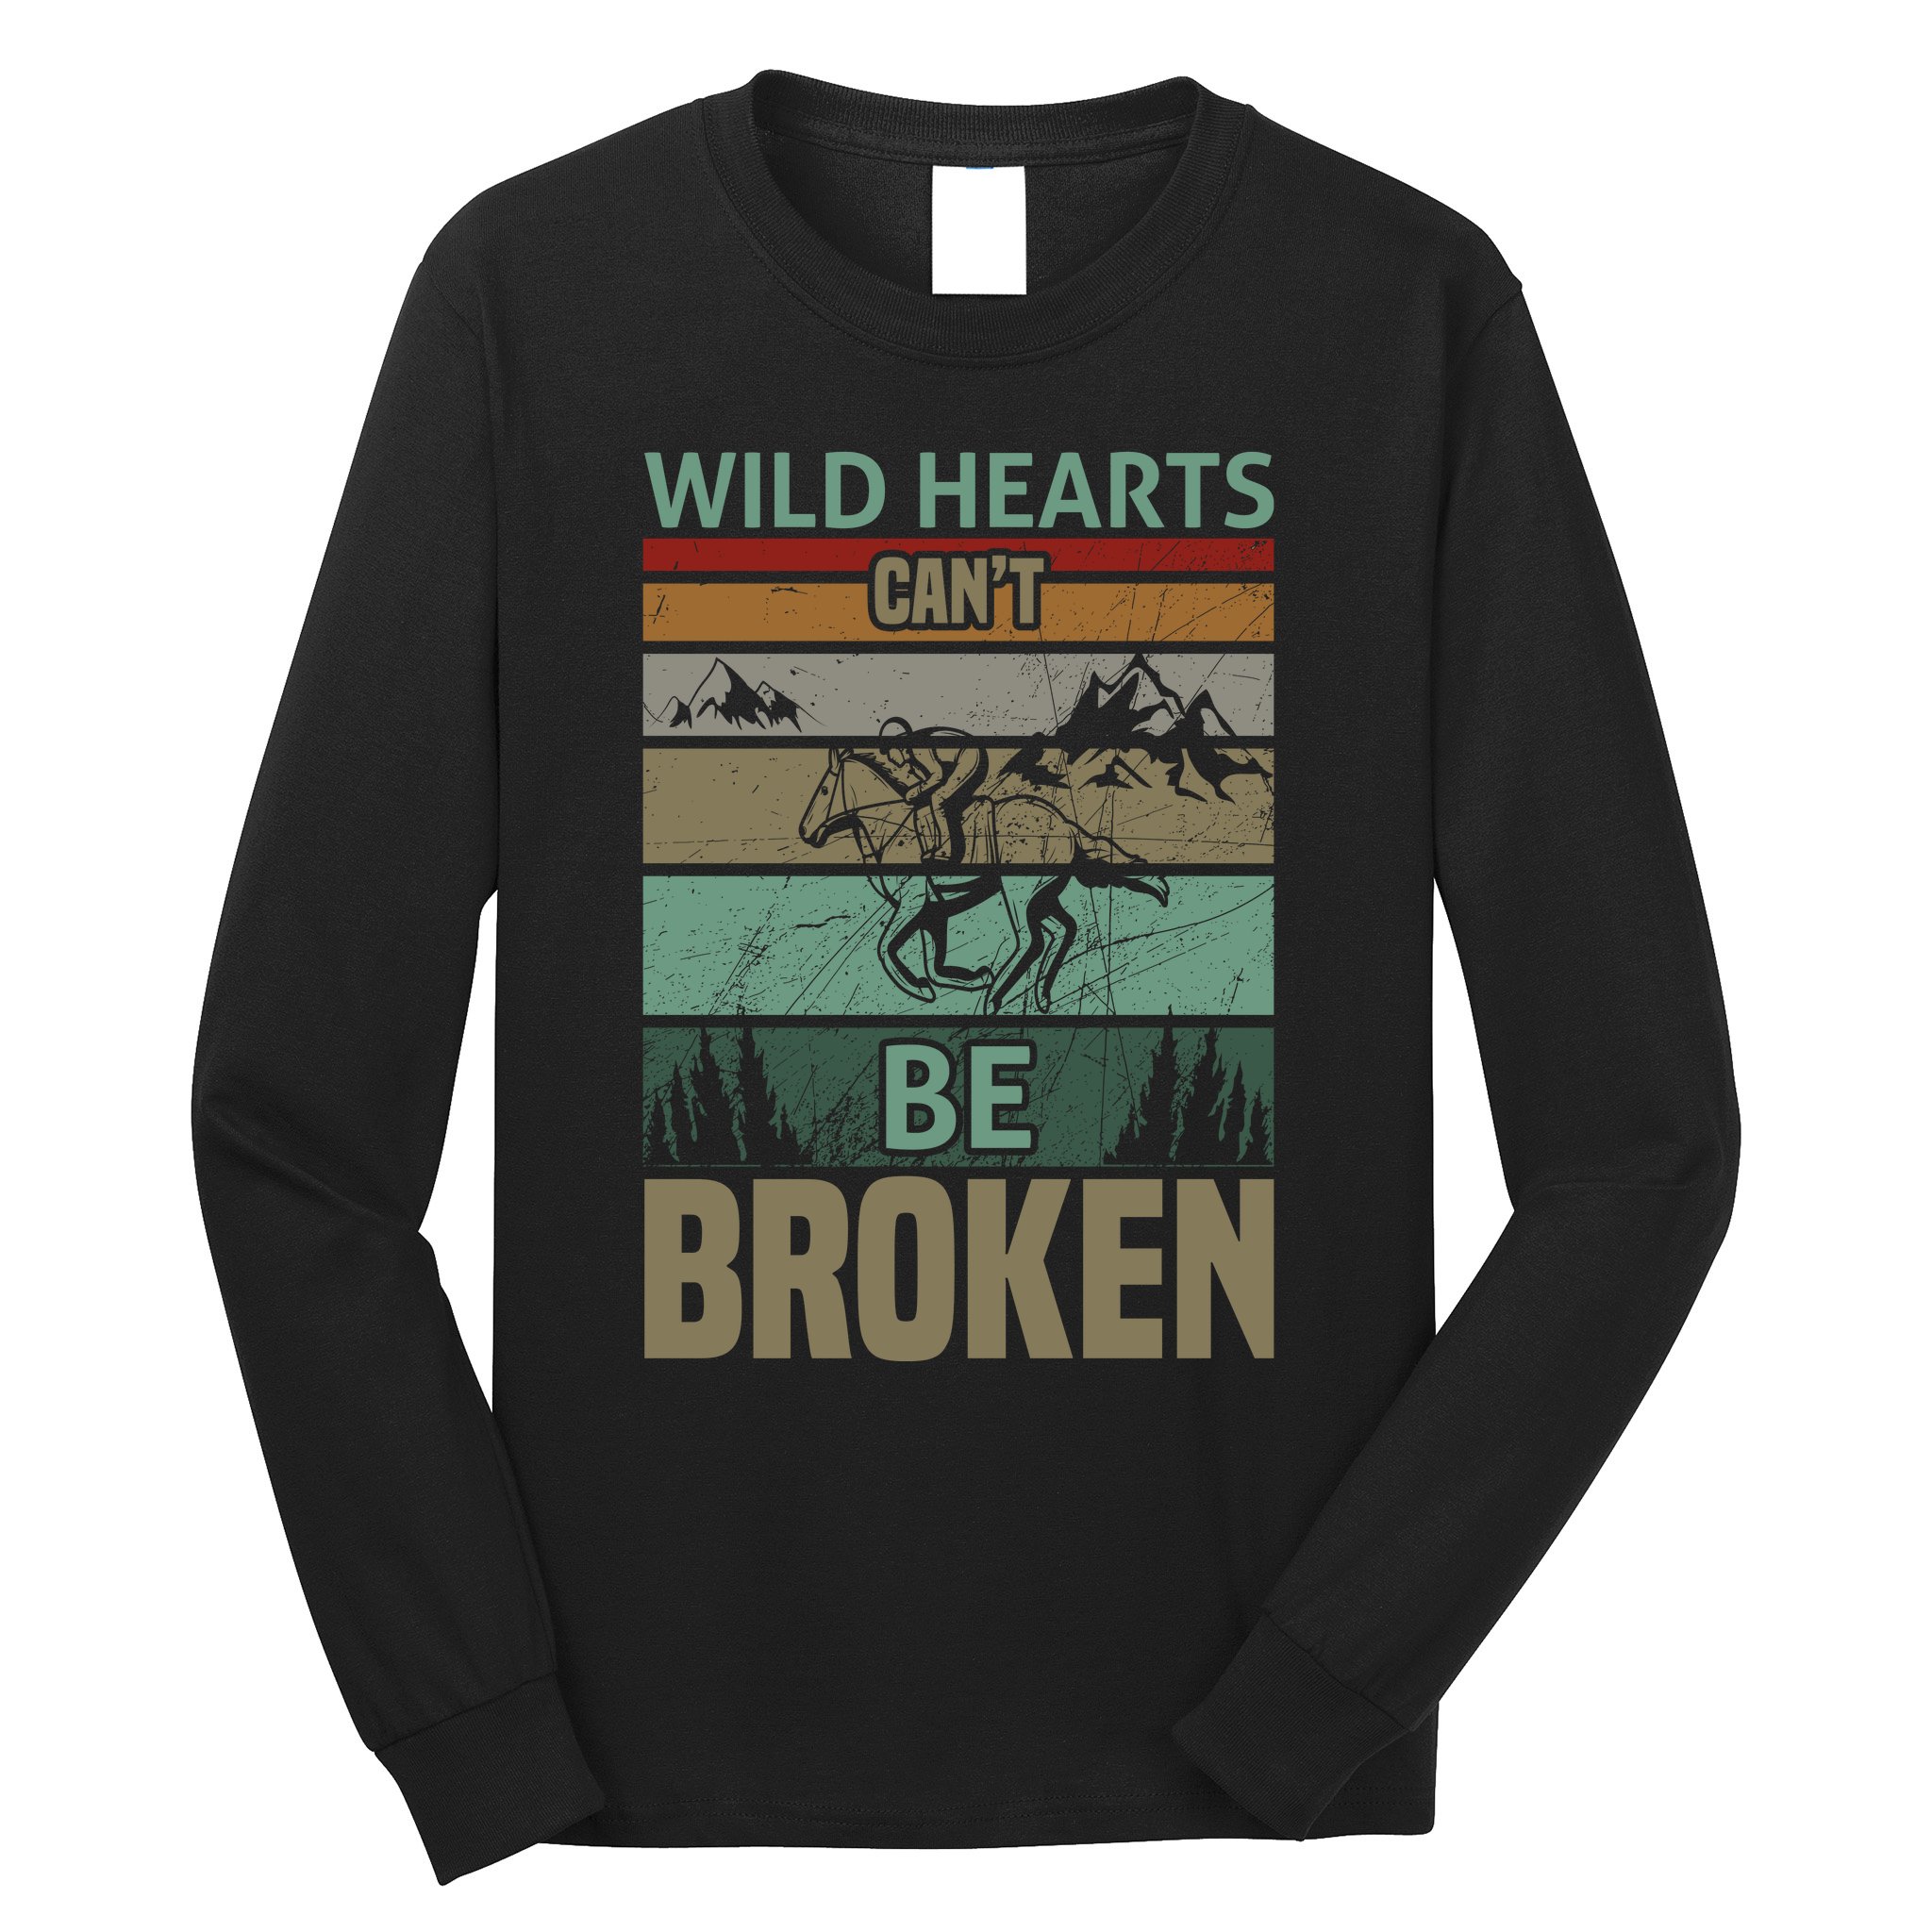 How long is Wild Hearts?